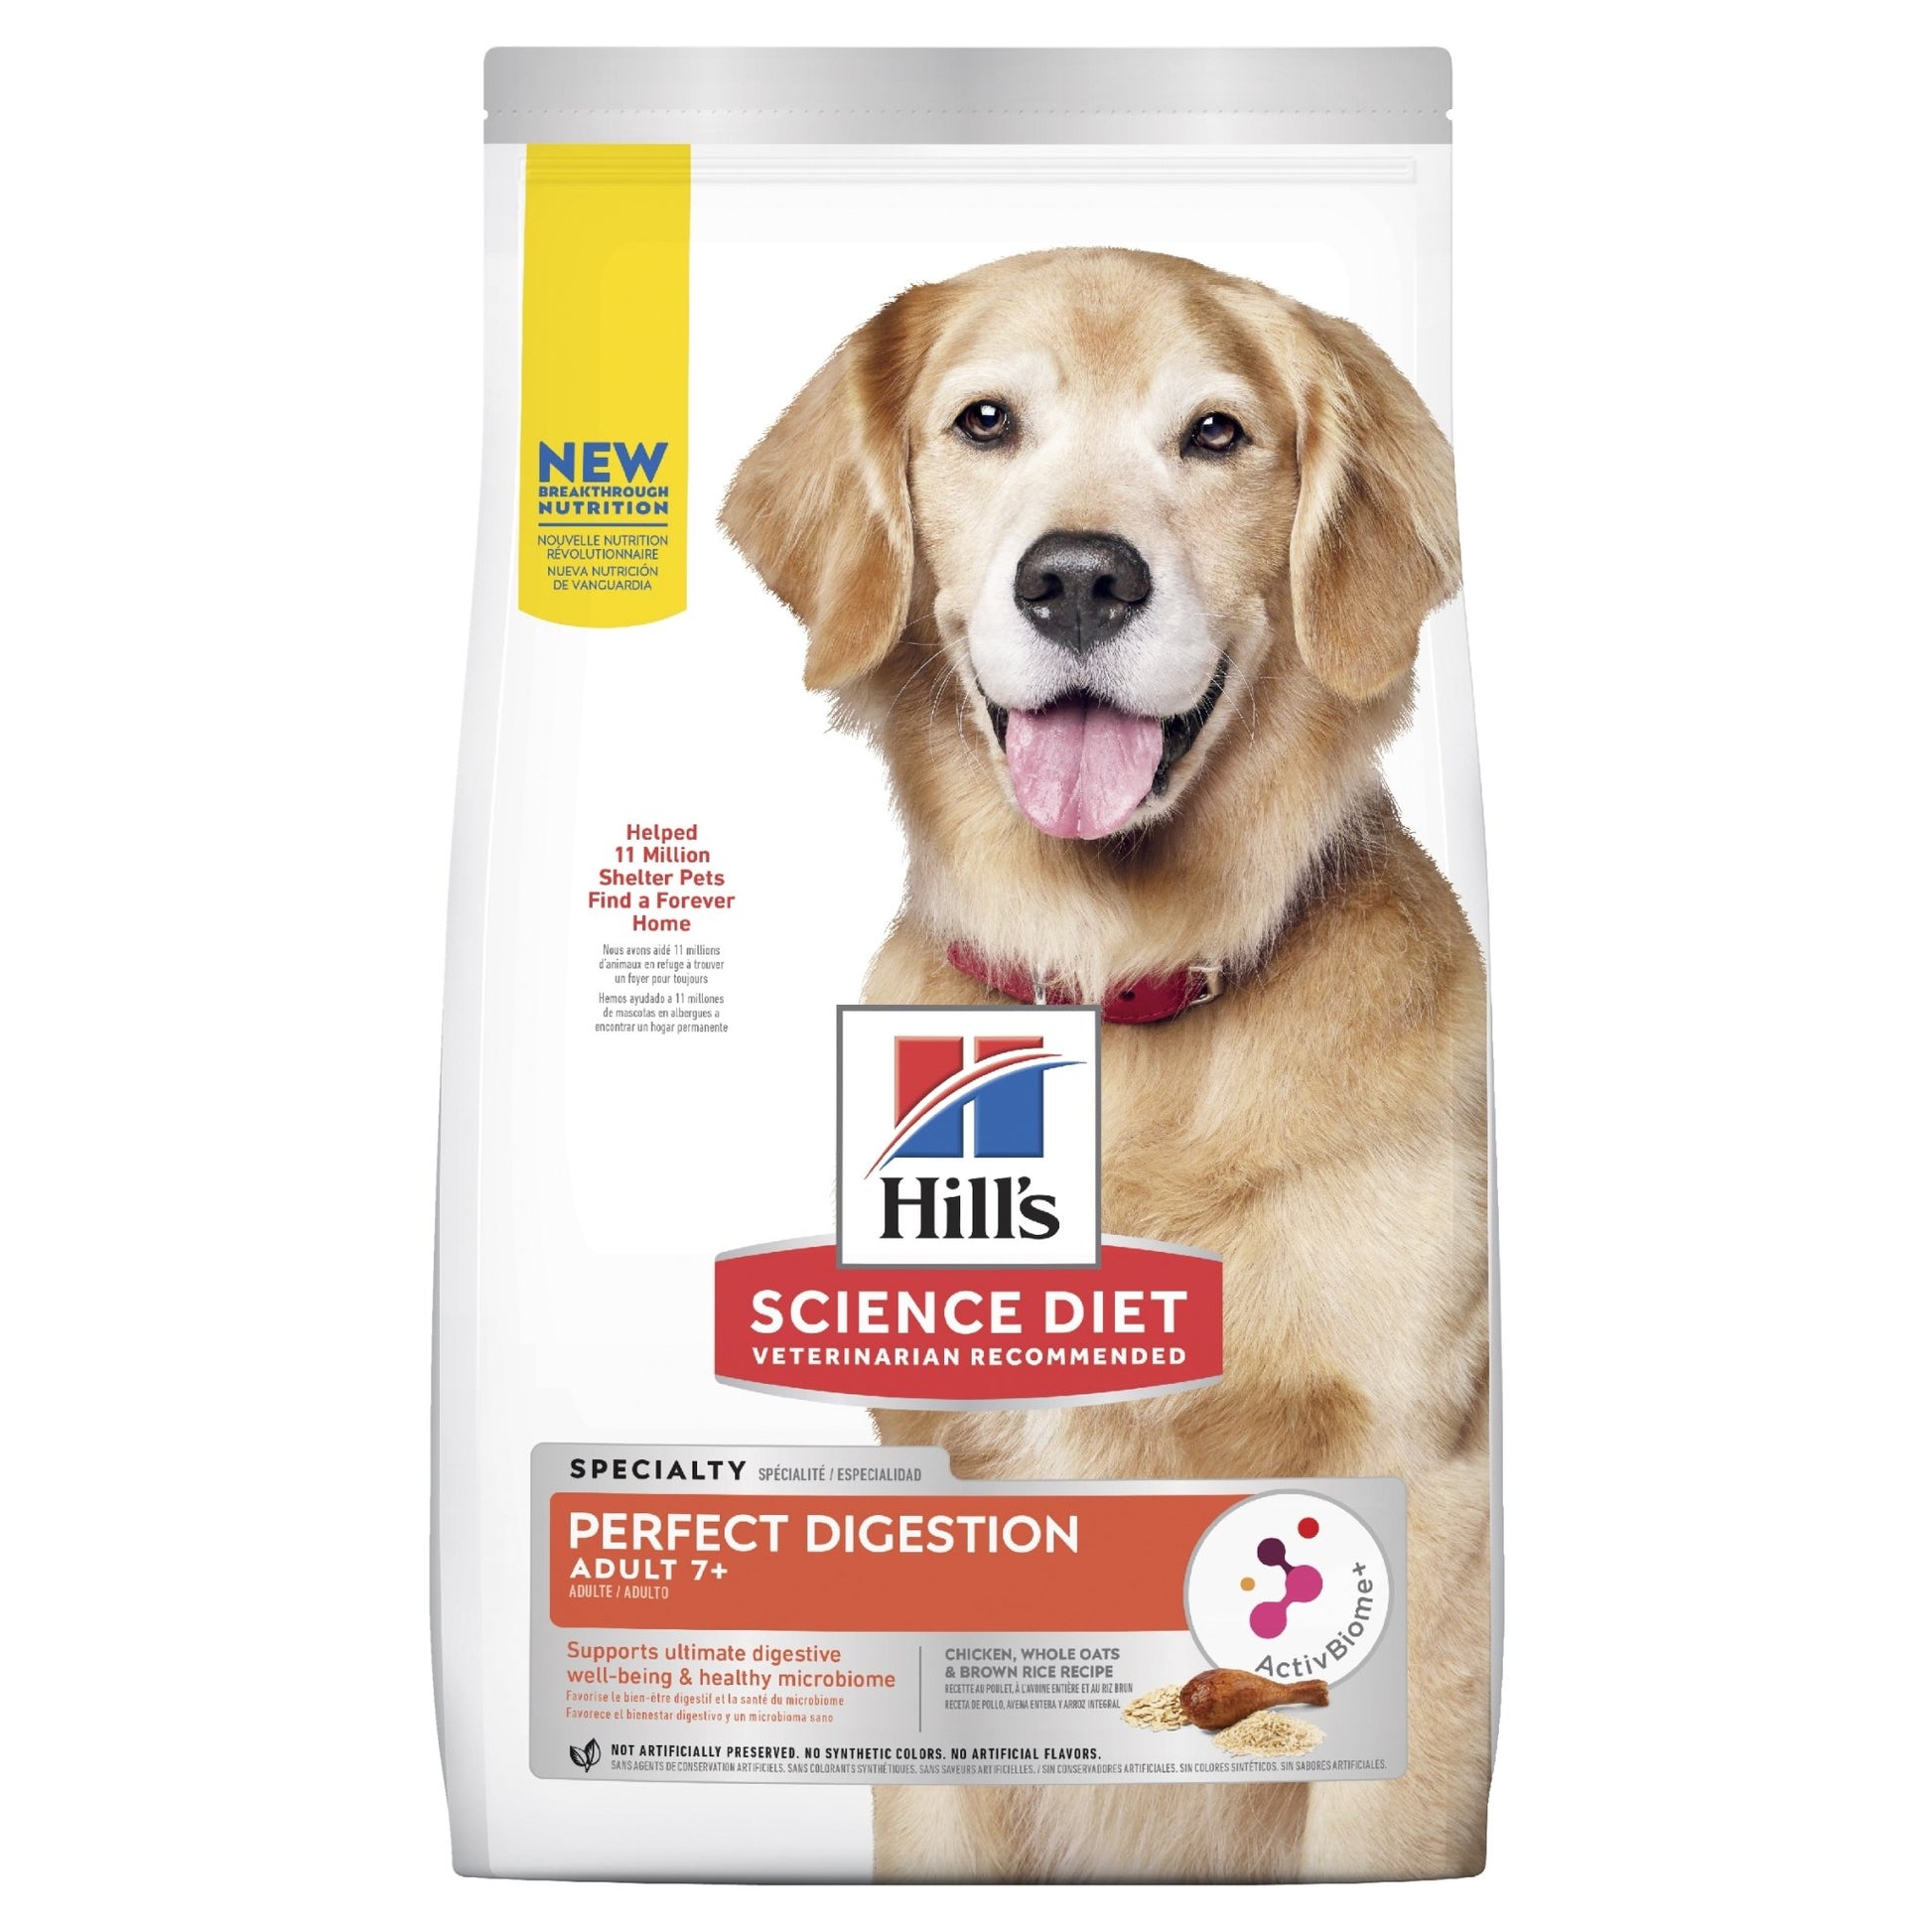 Hill' Science Diet Perfect Digestion Adult 7+ Dry Dog Food 5.44kg - Woonona Petfood & Produce